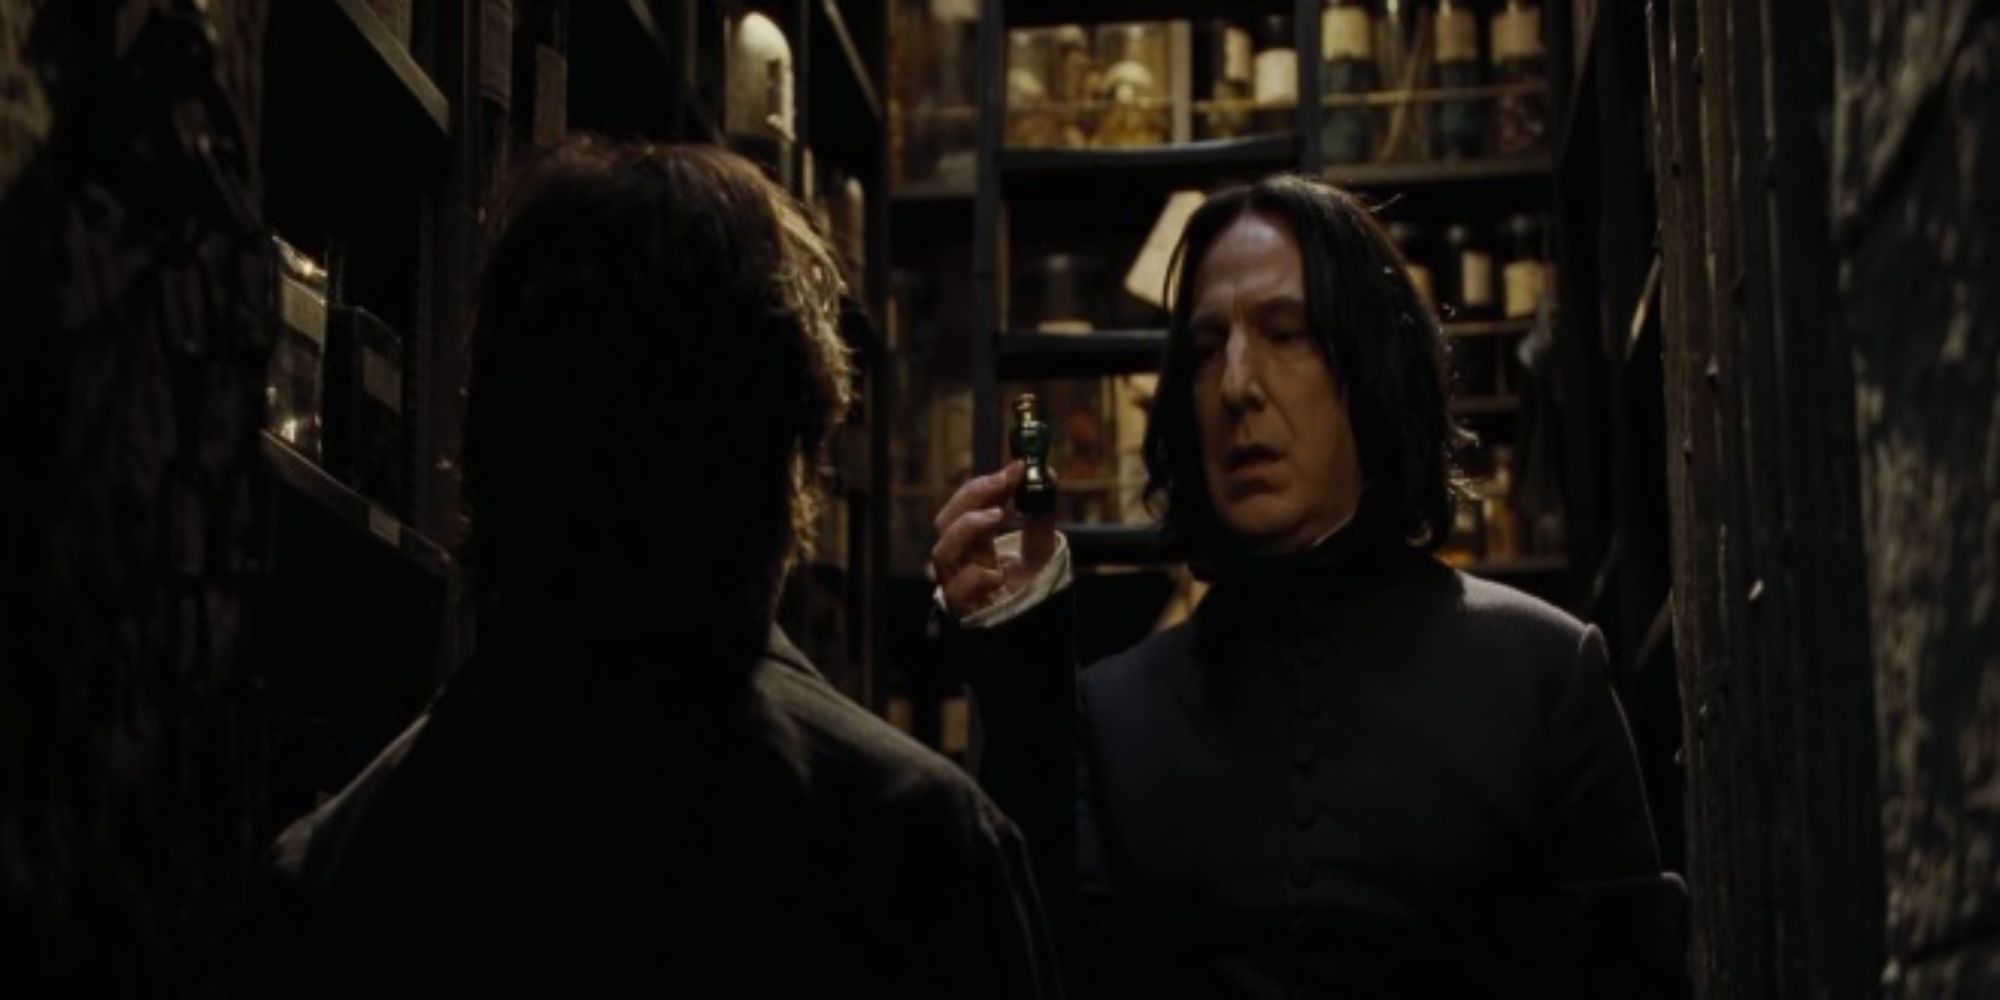 Snape shows Harry Potter a vial of Veritaserum potion